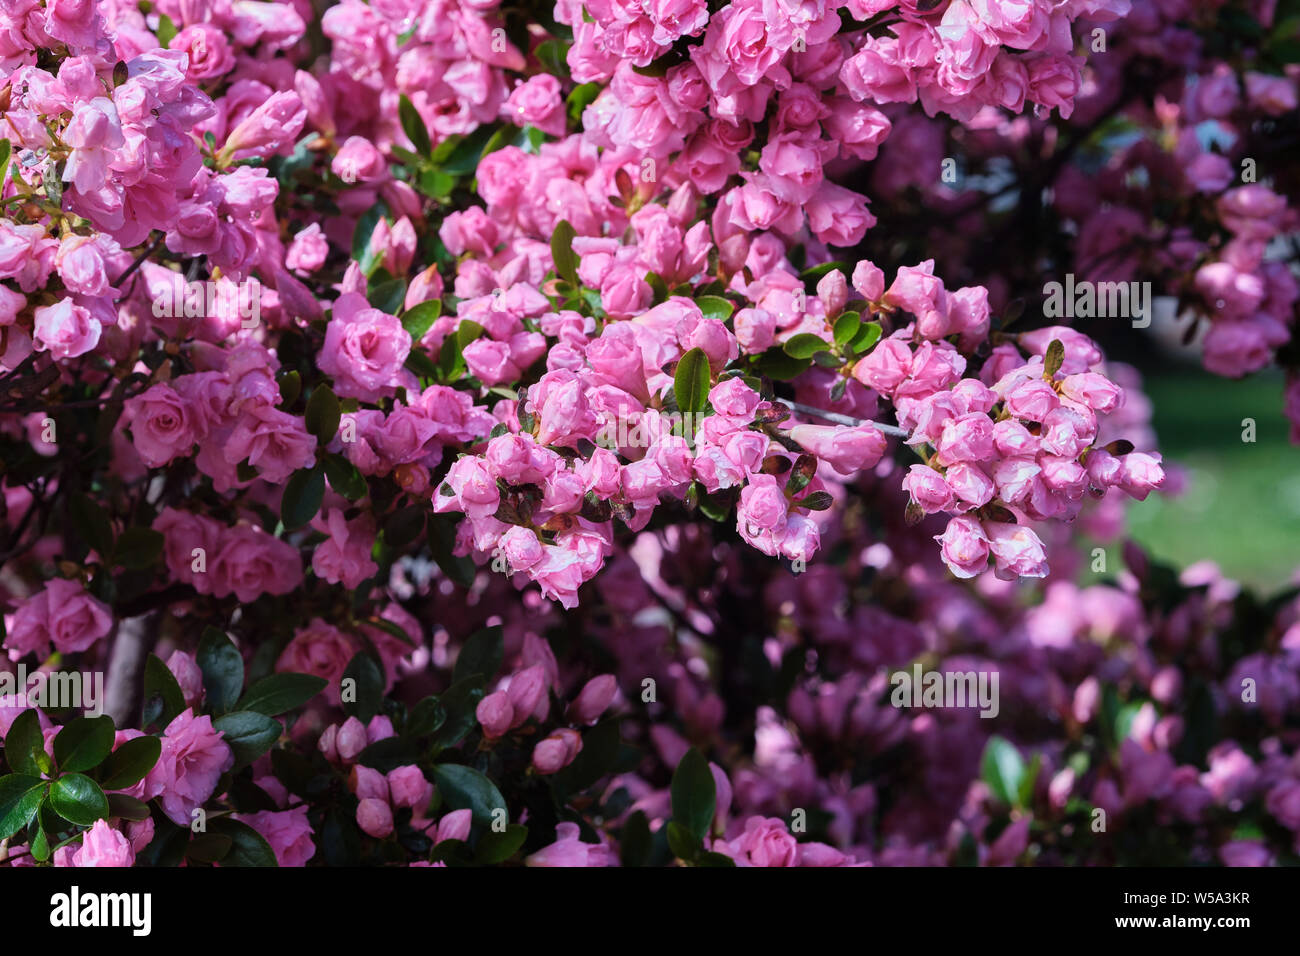 Pink flowers of Azalea, little bush with a spectacular blossoming Stock Photo